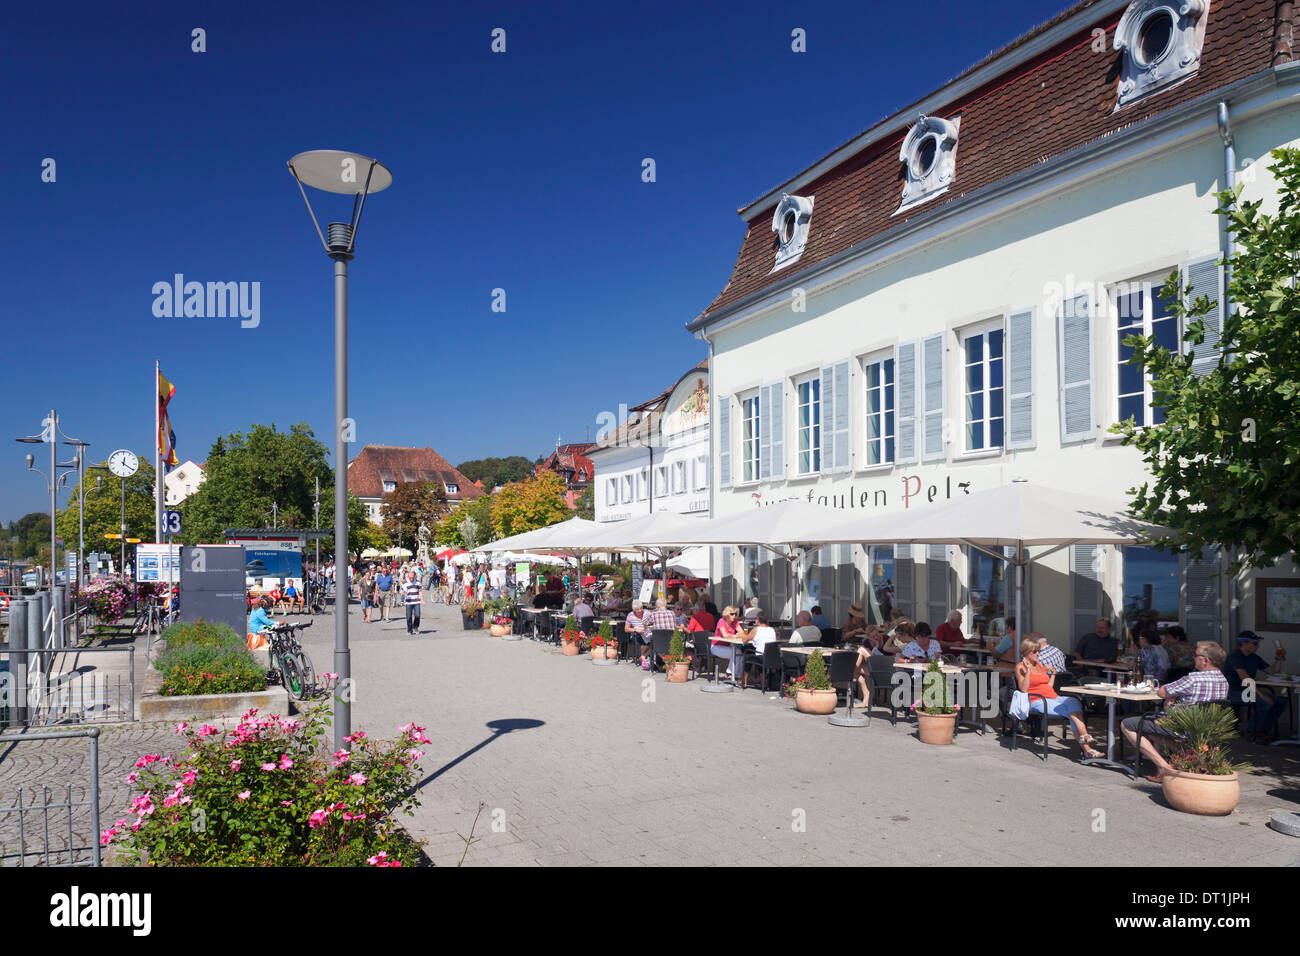 Promenade with restaurant and street cafe, Uberlingen, Lake Constance (Bodensee), Baden Wurttemberg, Germany, Europe Stock Photo